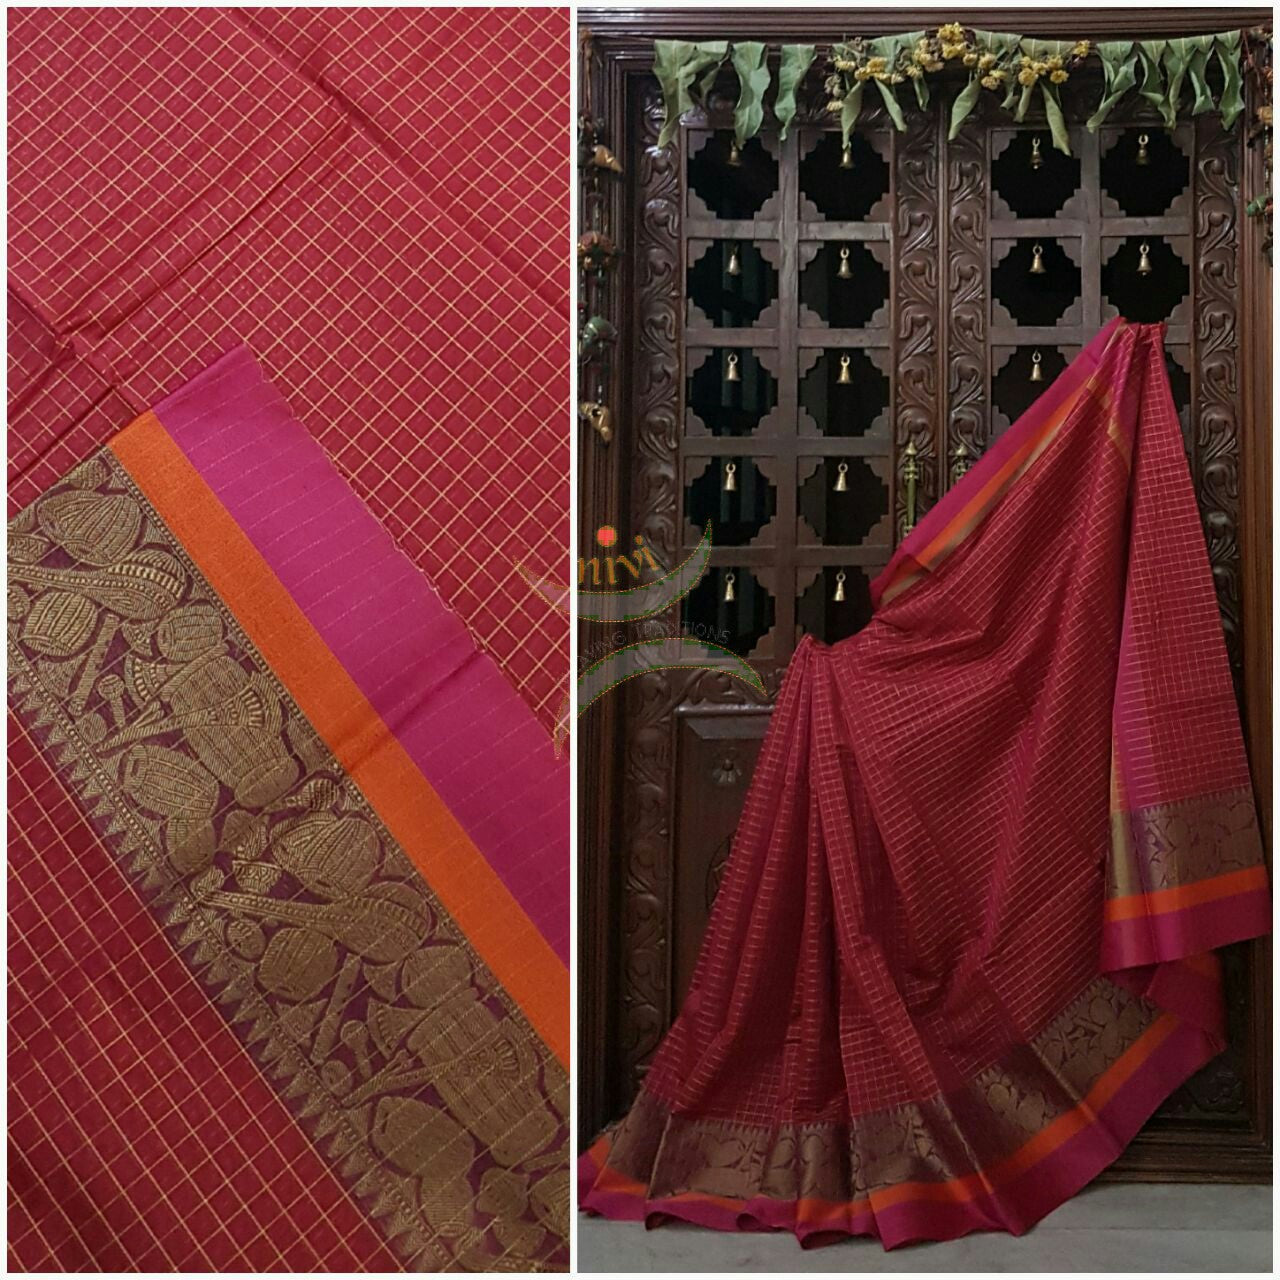 Bright Pink Silk Cotton chequered saree with satin finish contrasting pink orange border and woven musical instruments at border with antique gold zari.